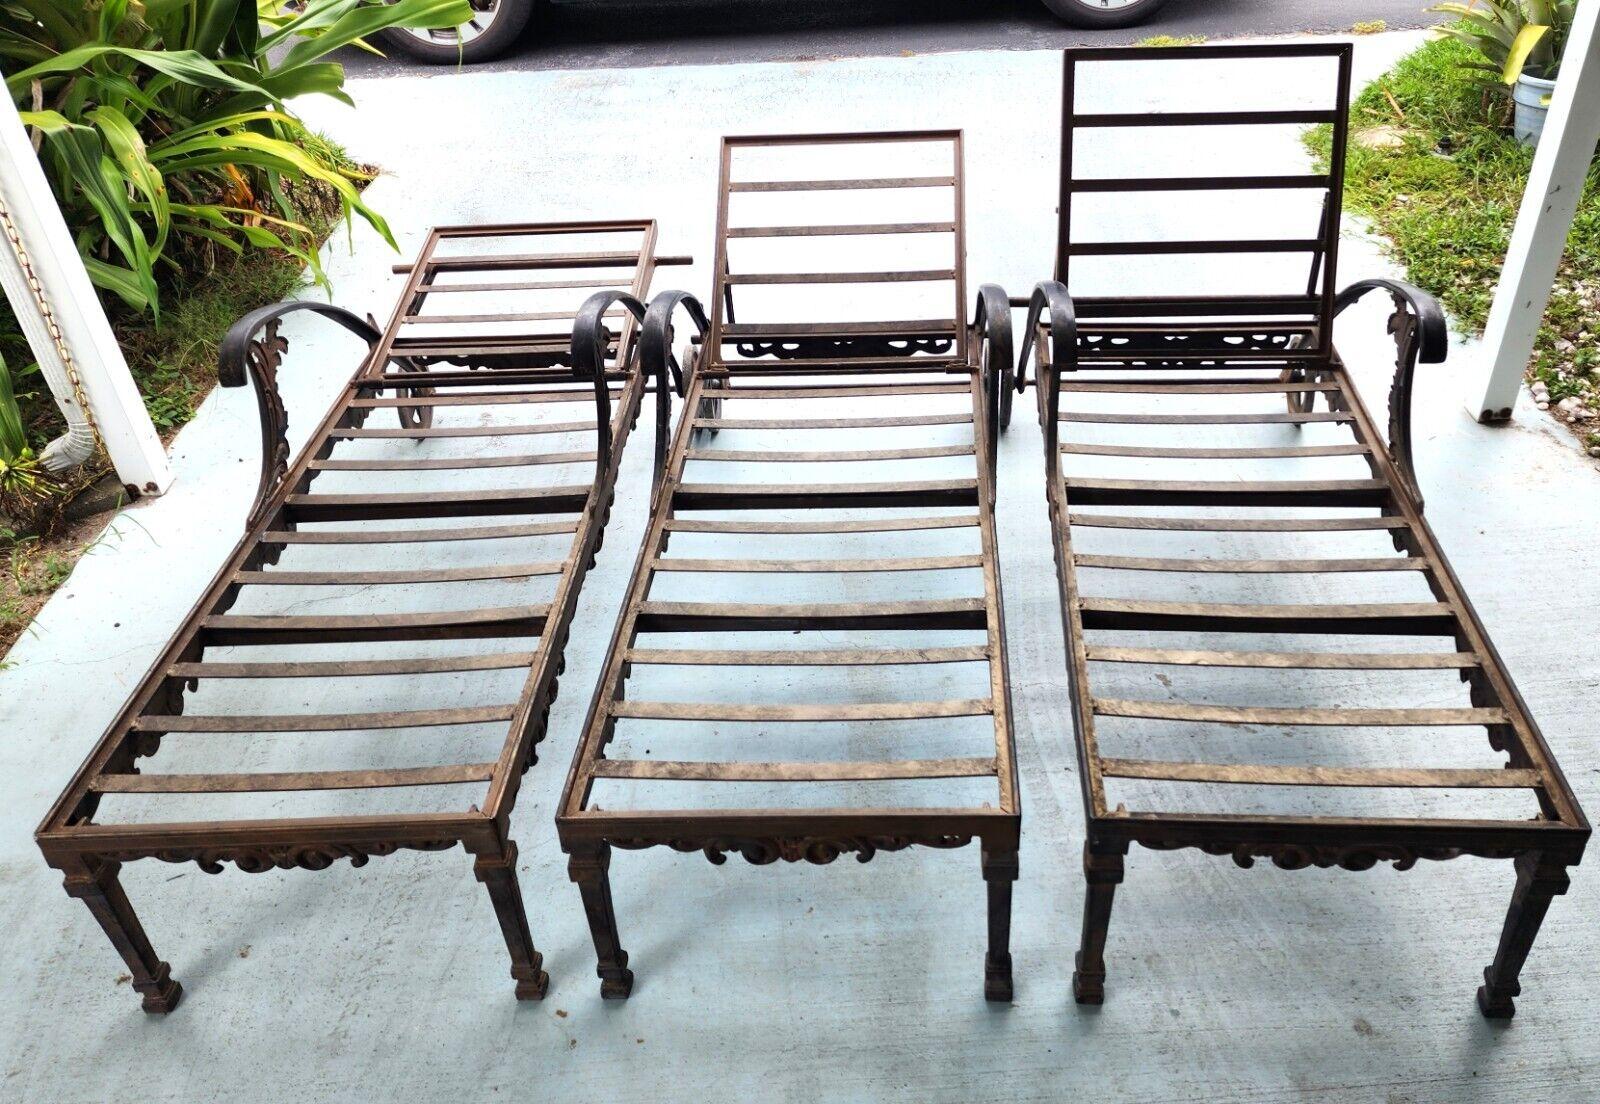 Vintage Chaise Lounges Outdoor Ornate Rustproof For Sale 2